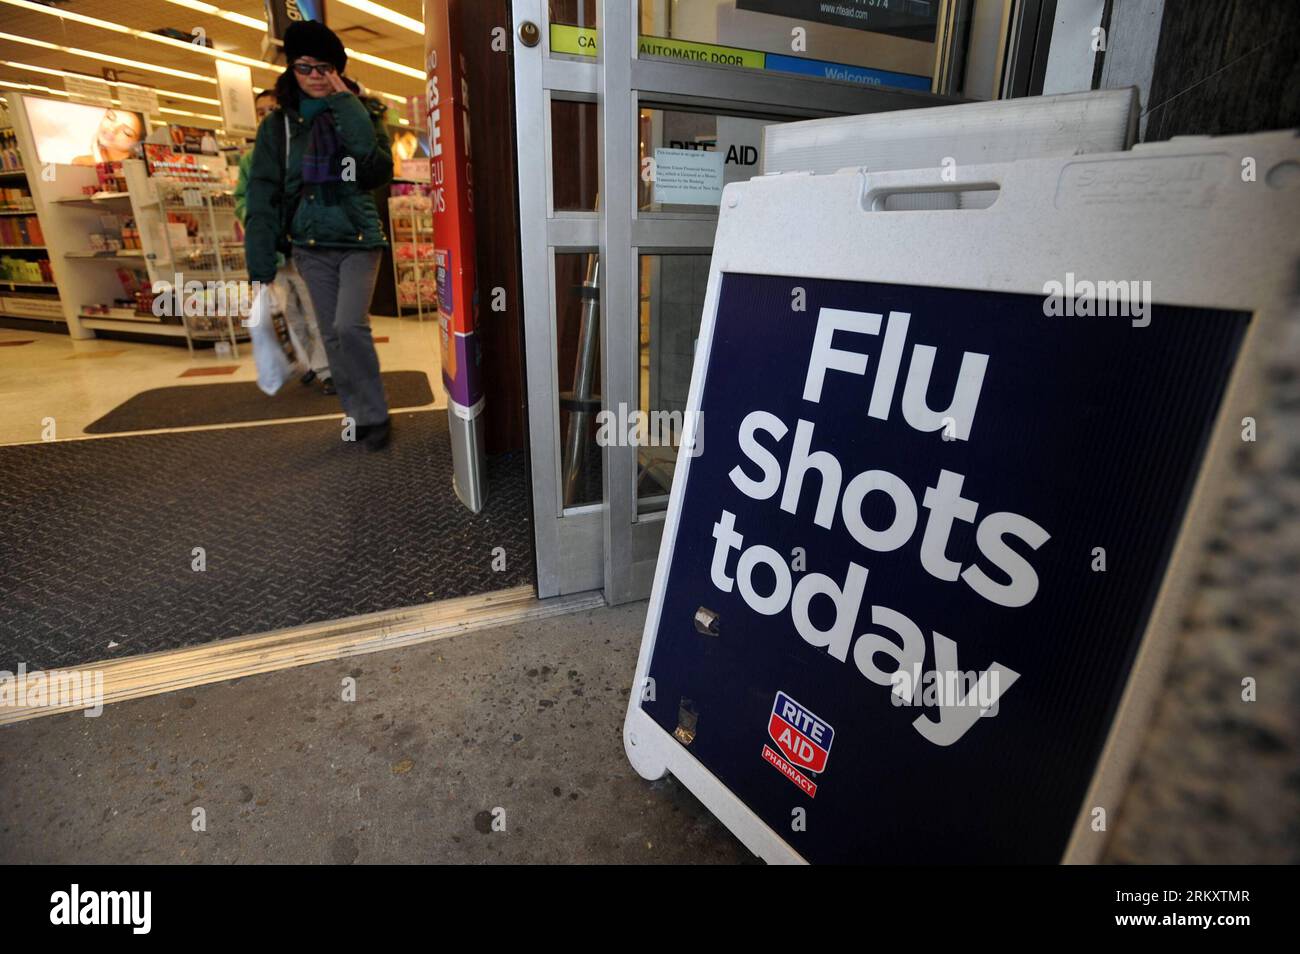 Bildnummer: 59085459  Datum: 15.01.2013  Copyright: imago/Xinhua (130115) -- NEW YORK, Jan. 15, 2013 (Xinhua) -- A sign advertising the availability of flu shots is put outside a CVS pharmacy store in New York, the United States, Jan. 15, 2013. As of Sunday, more than 20,000 cases of influenza have been reported in New York State for this season, far more than the 4, 404 cases that were reported in the last season. (Xinhua/Wang Lei) US-NEW YORK-FLU-OUTBREARK PUBLICATIONxNOTxINxCHN Gesellschaft Grippe Grippewelle Epidemie Gesundheit Apotheke Impfung Medikament xas x0x 2013 quer Aufmacher premiu Stock Photo